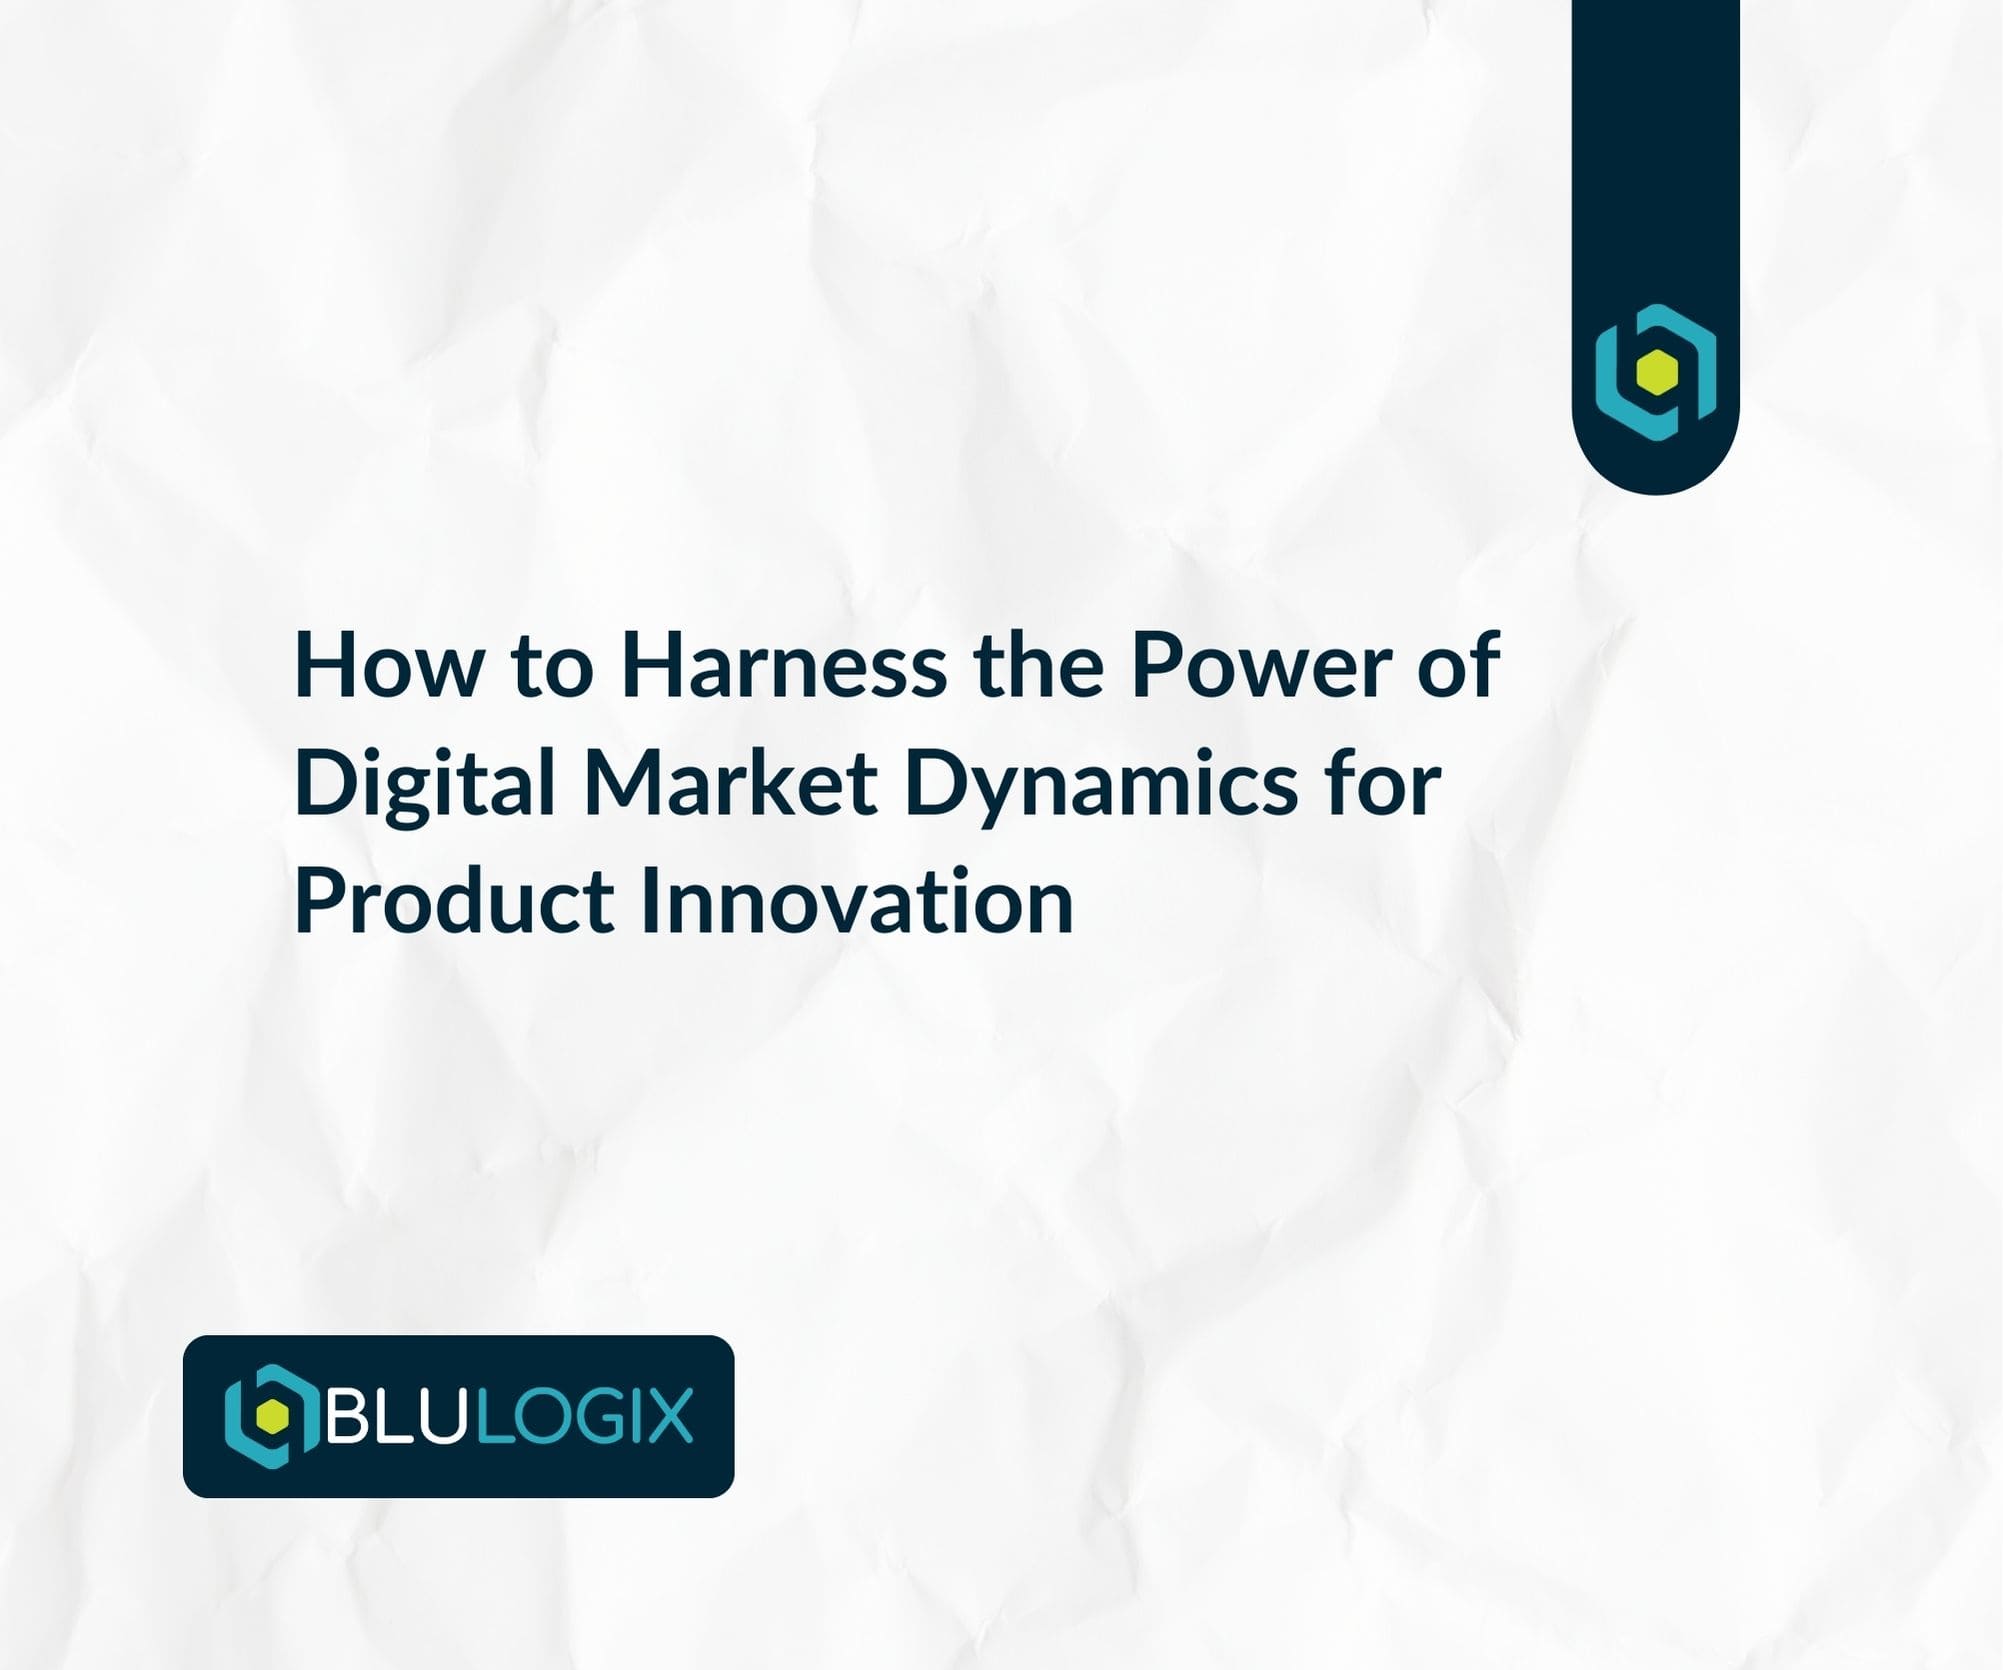 How to Harness the Power of Digital Market Dynamics for Product Innovation